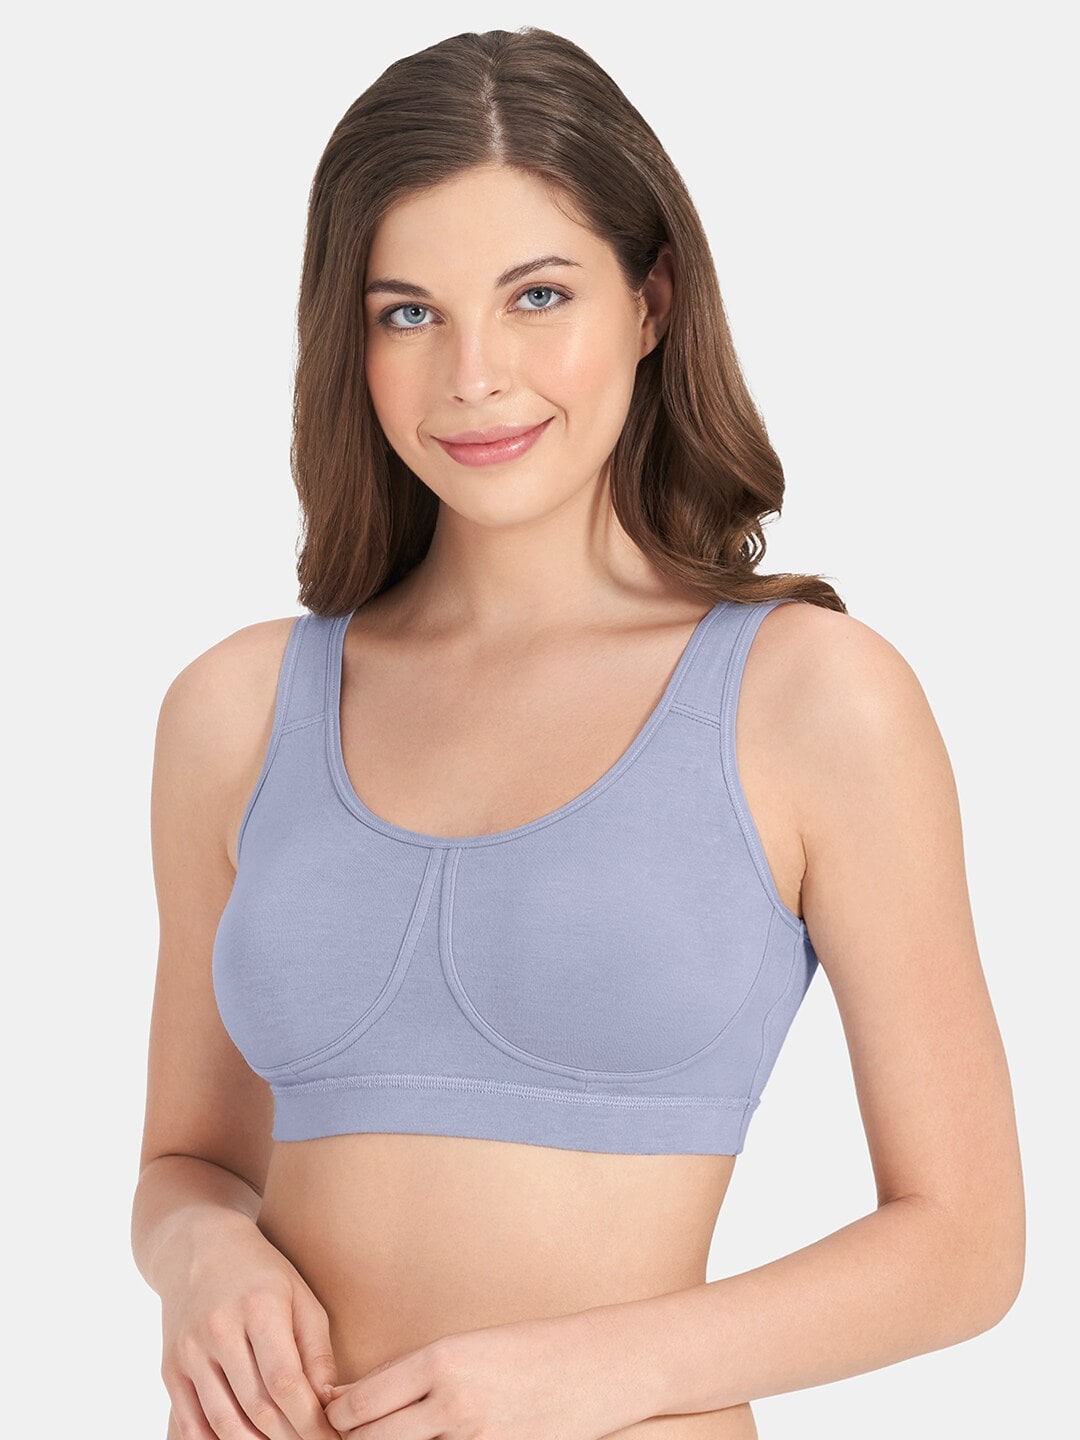 Amante Blue Solid Non-Padded Non-Wired Full Coverage Sleep Bra - BRA78901 Price in India